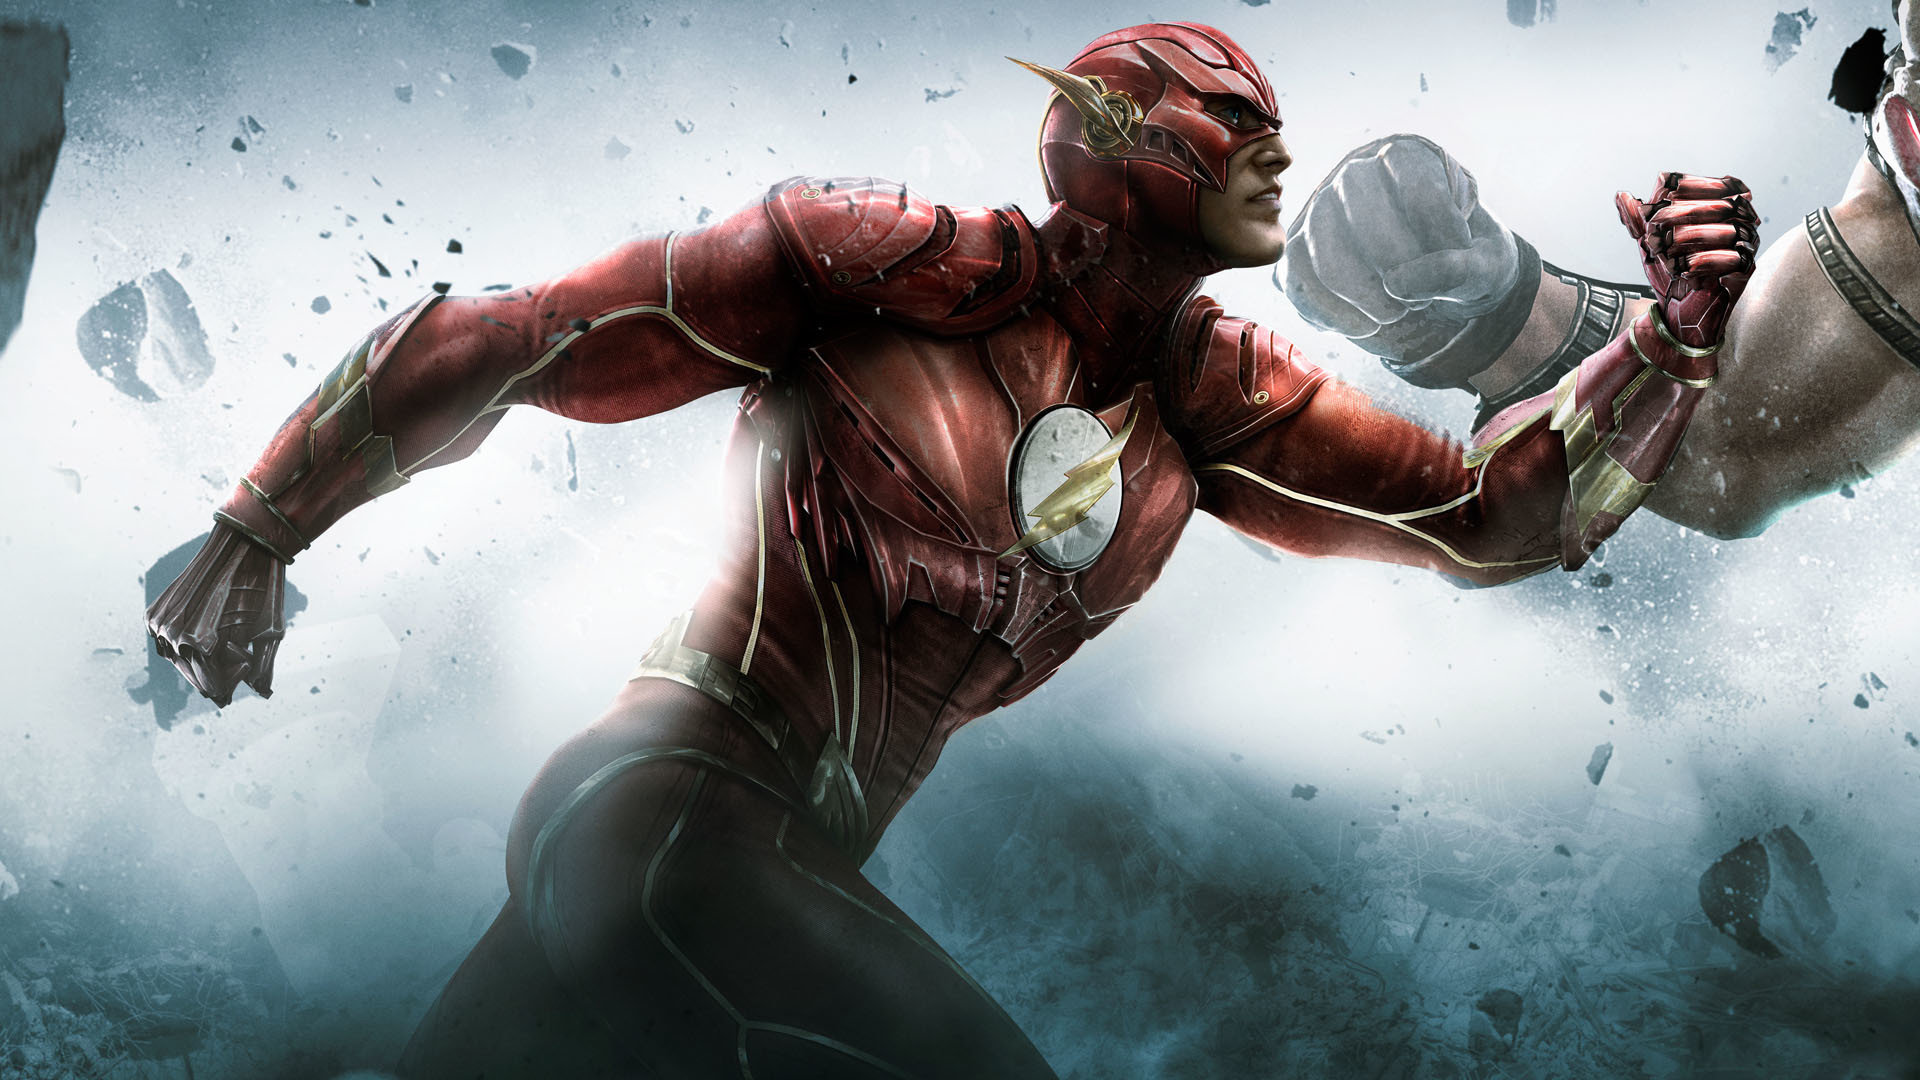 1920x1080 Injustice: Gods Among Us - Fastest Man Alive | Steam Trading Cards Wiki |  FANDOM powered by Wikia